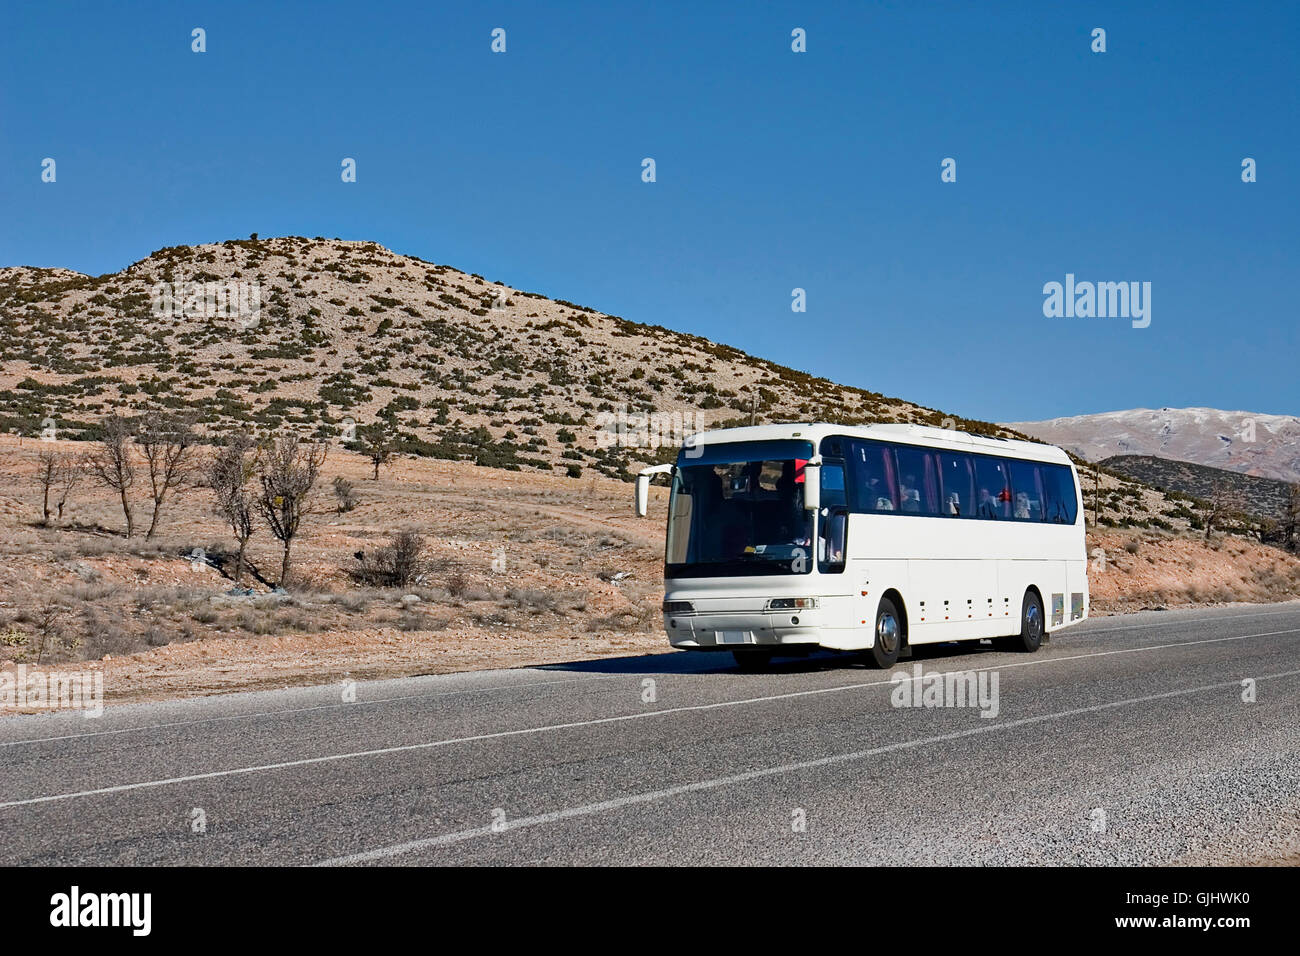 turkey vehicle means of travel Stock Photo